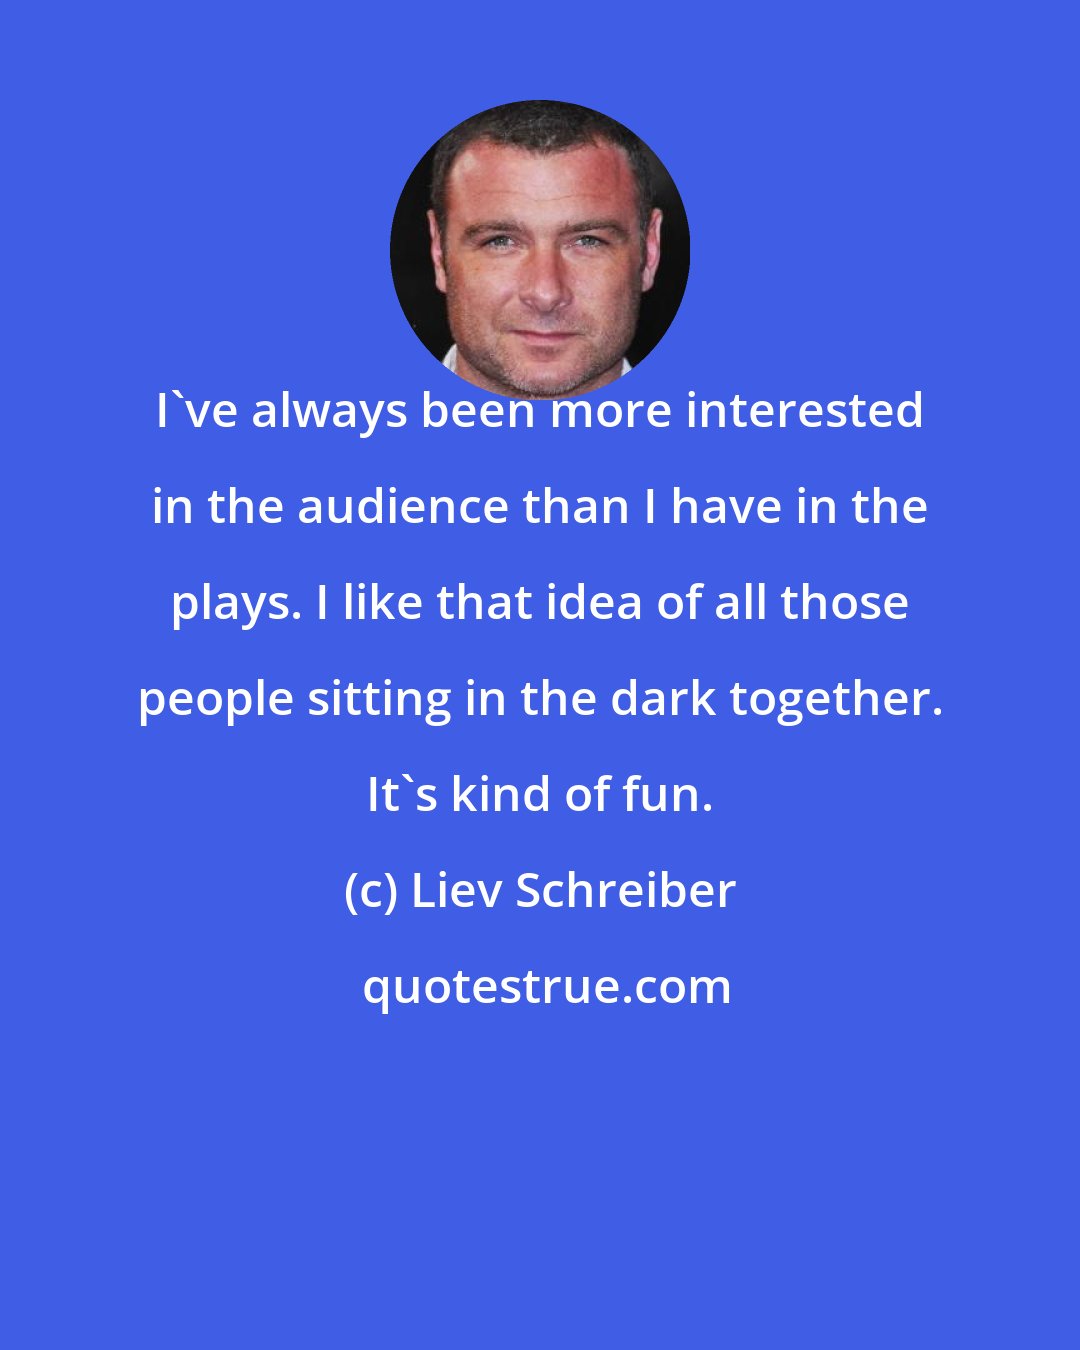 Liev Schreiber: I've always been more interested in the audience than I have in the plays. I like that idea of all those people sitting in the dark together. It's kind of fun.